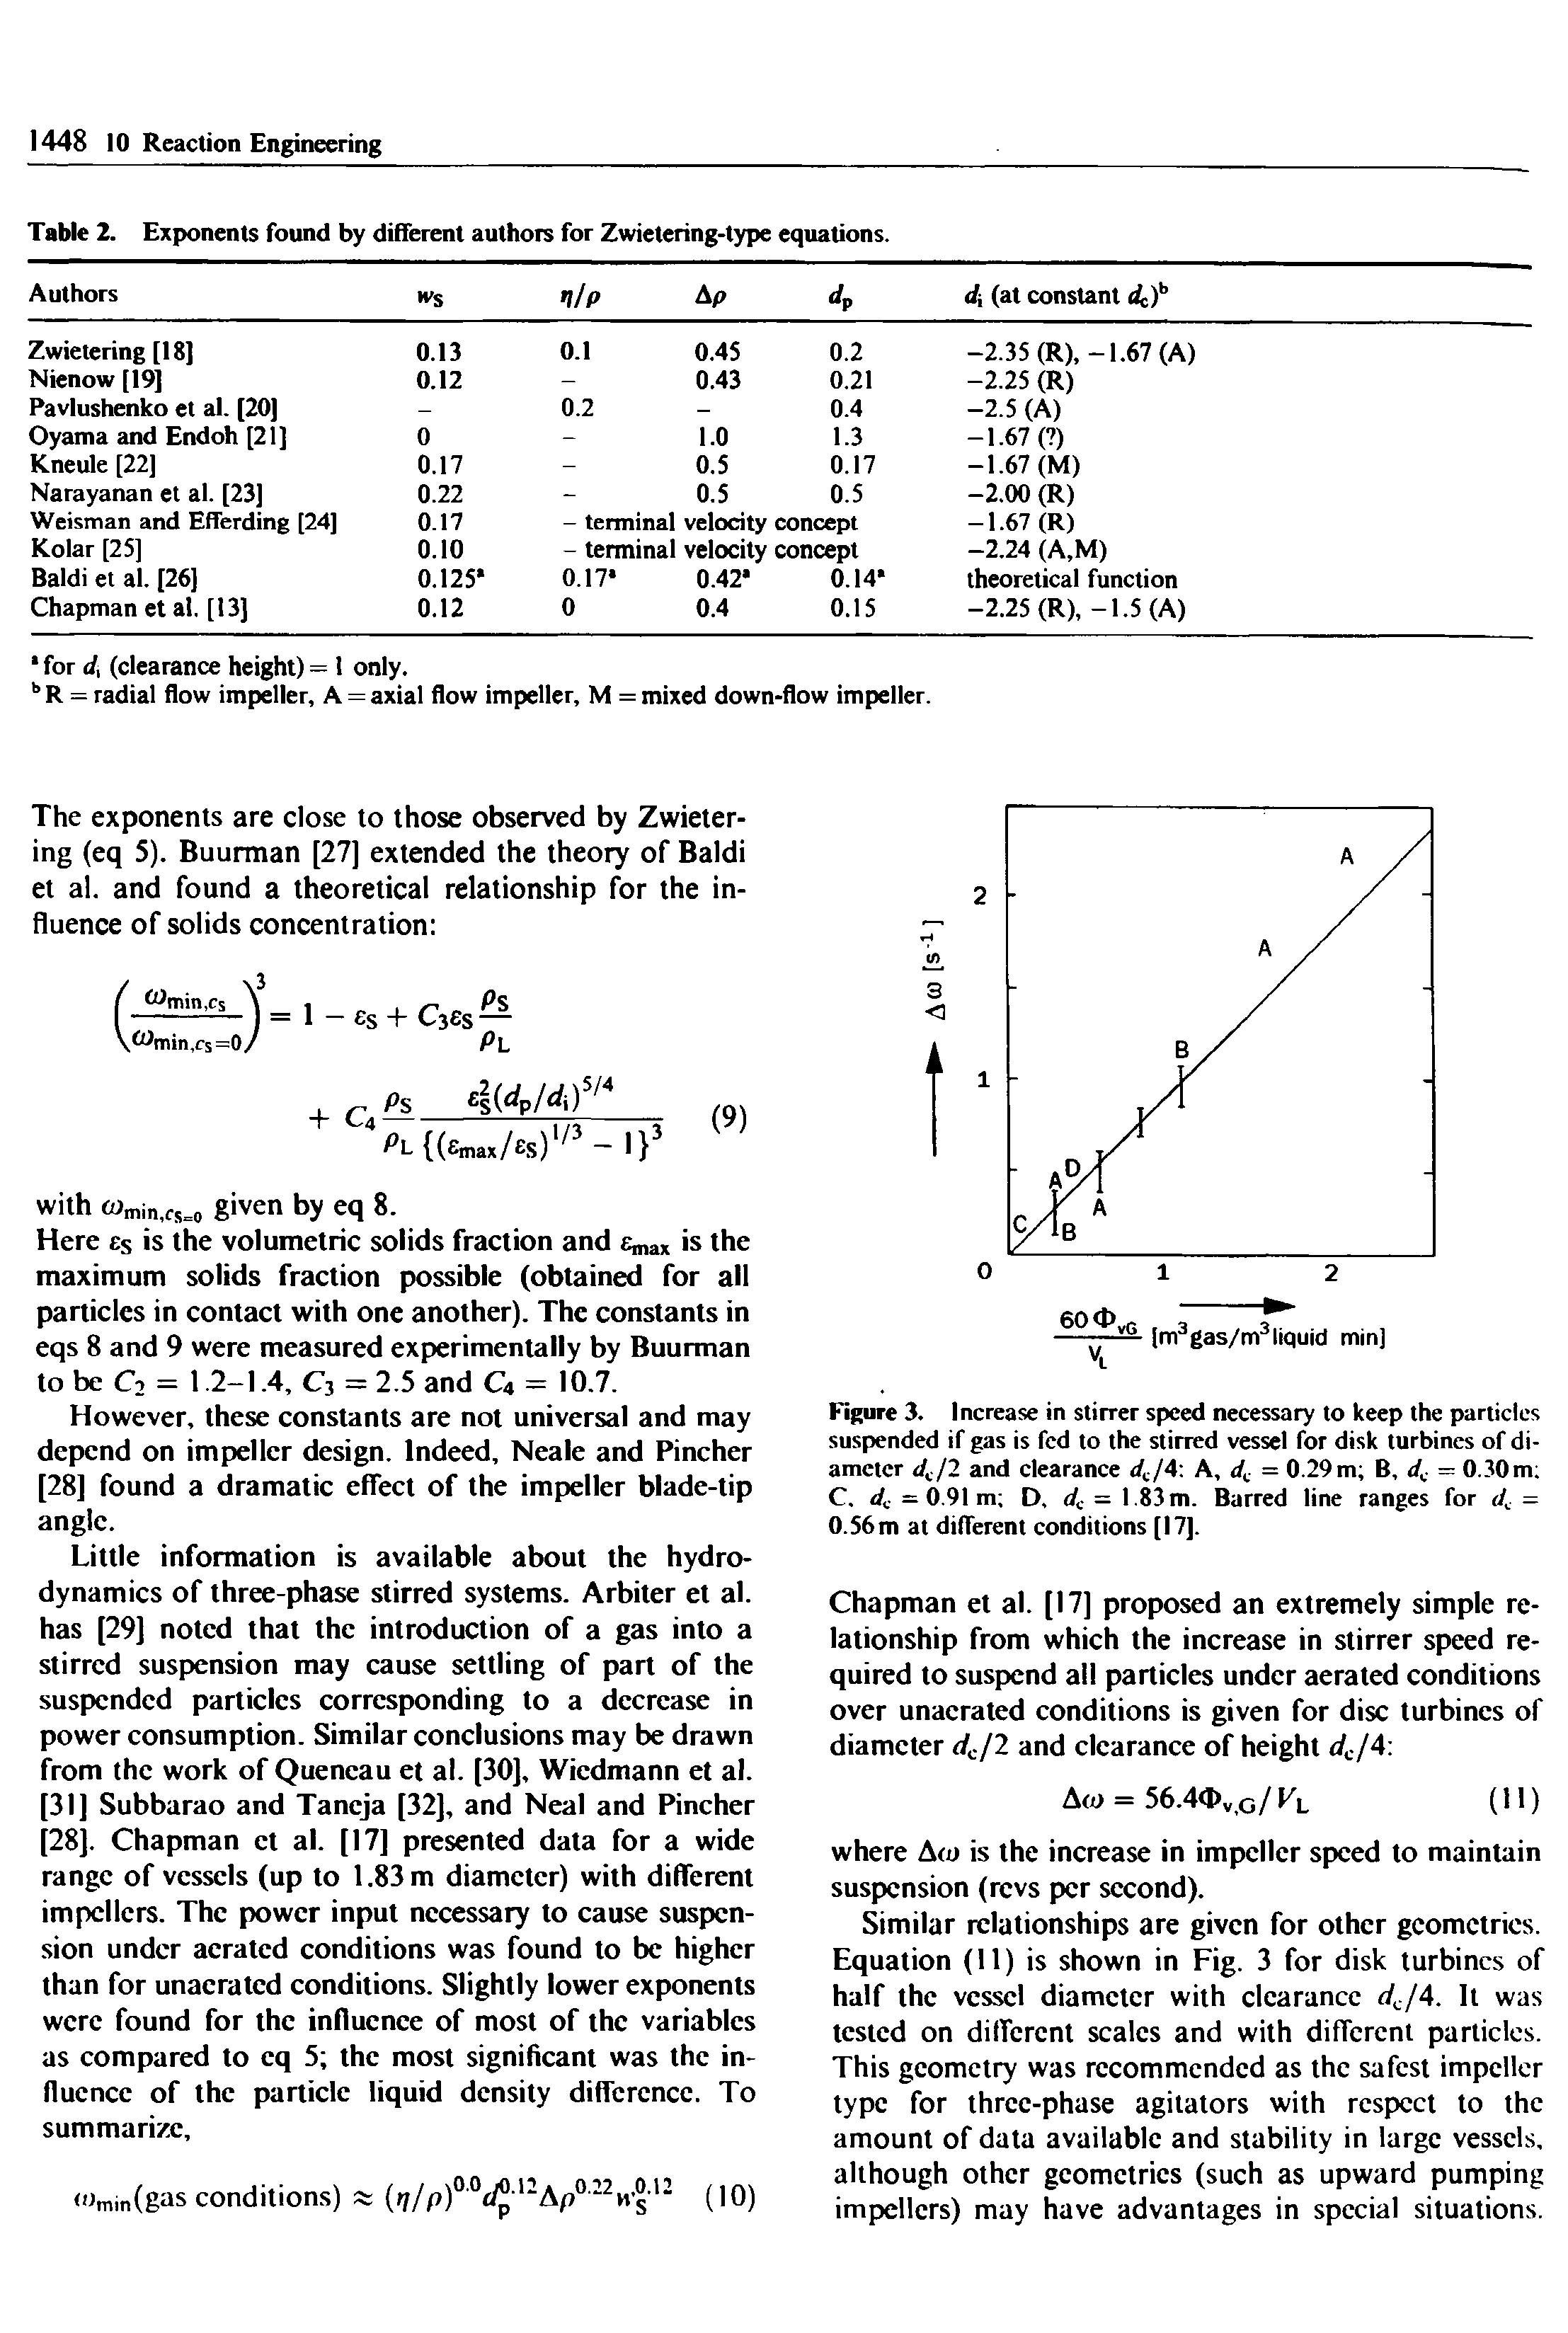 Figure 3. Increase in stirrer speed necessary to keep the particles suspended if gas is fed to the stirred vessel for disk turbines of diameter 4/2 and clearance 4/4 A, 4 = 0.29 m B, 4 = 0.30m C. 4 = 0.91 m D, 4 = l-83m. Barred line ranges for 4 = 0.56 m at dilferent conditions [17].